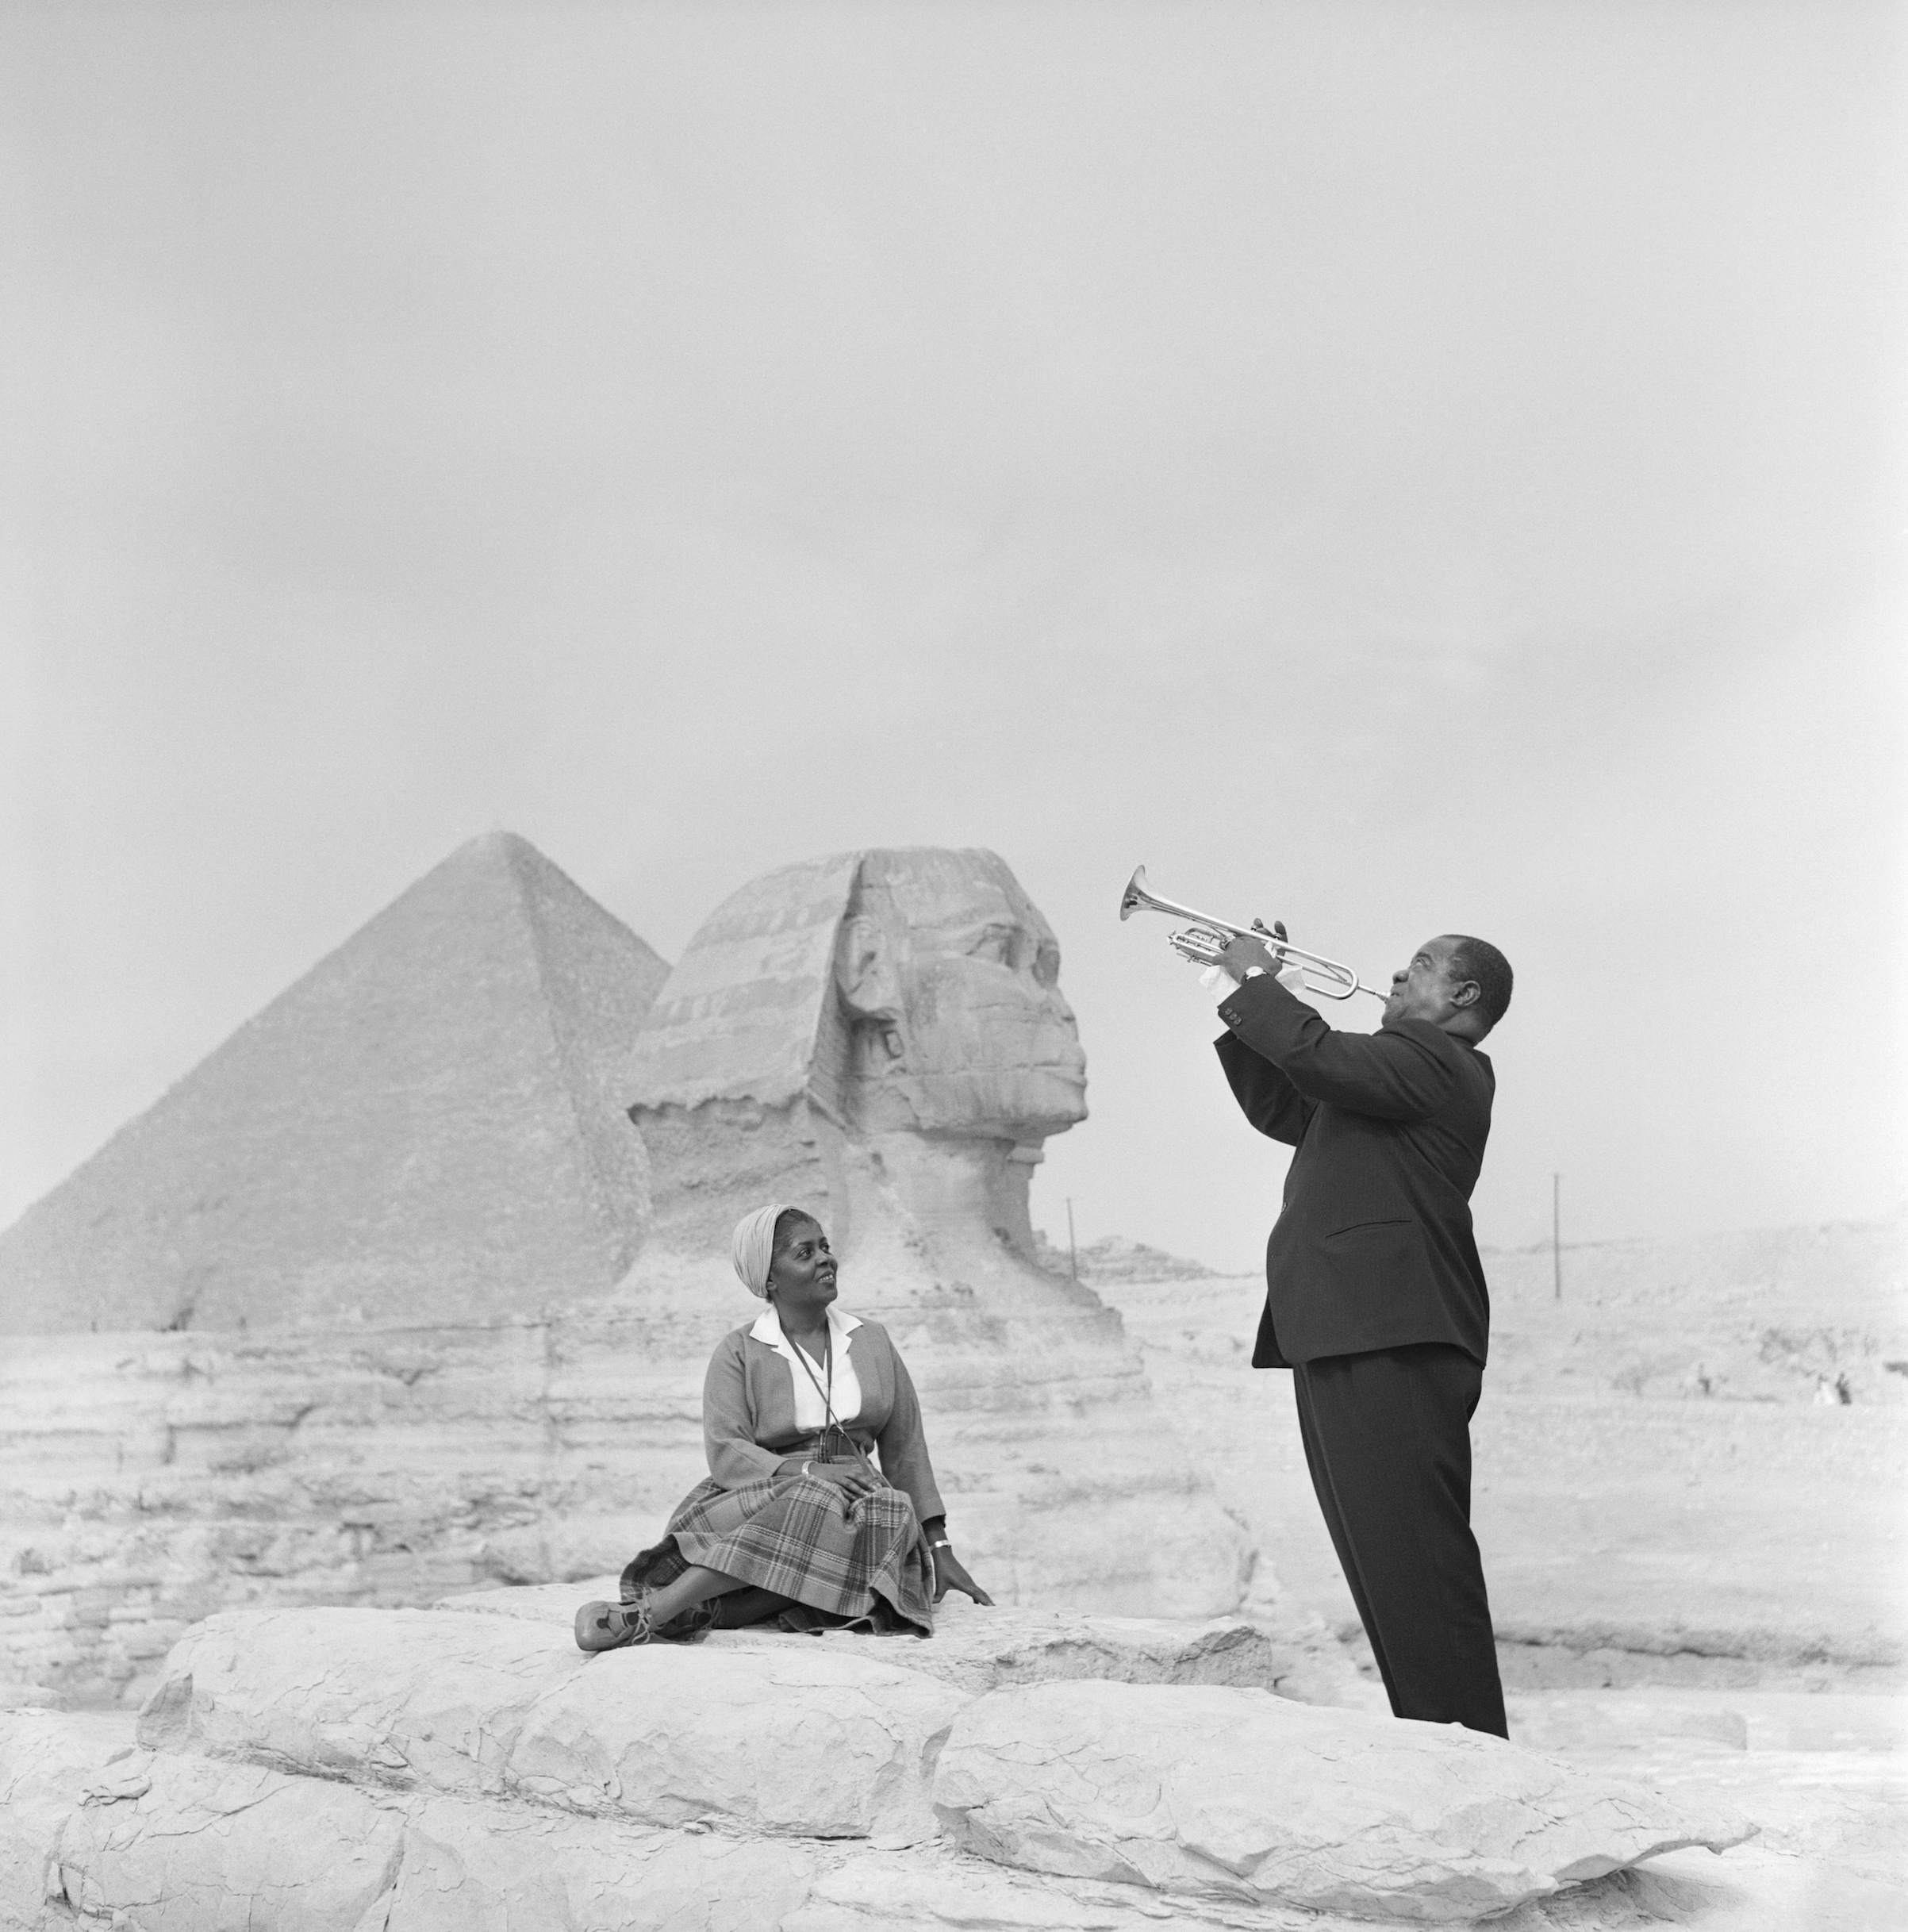 American jazz trumpeter Louis Armstrong plays the trumpet while his wife sits listening, with the Sphinx and one of the pyramids behind her, during a visit to the pyramids at Giza. (Bettmann / Getty Images)